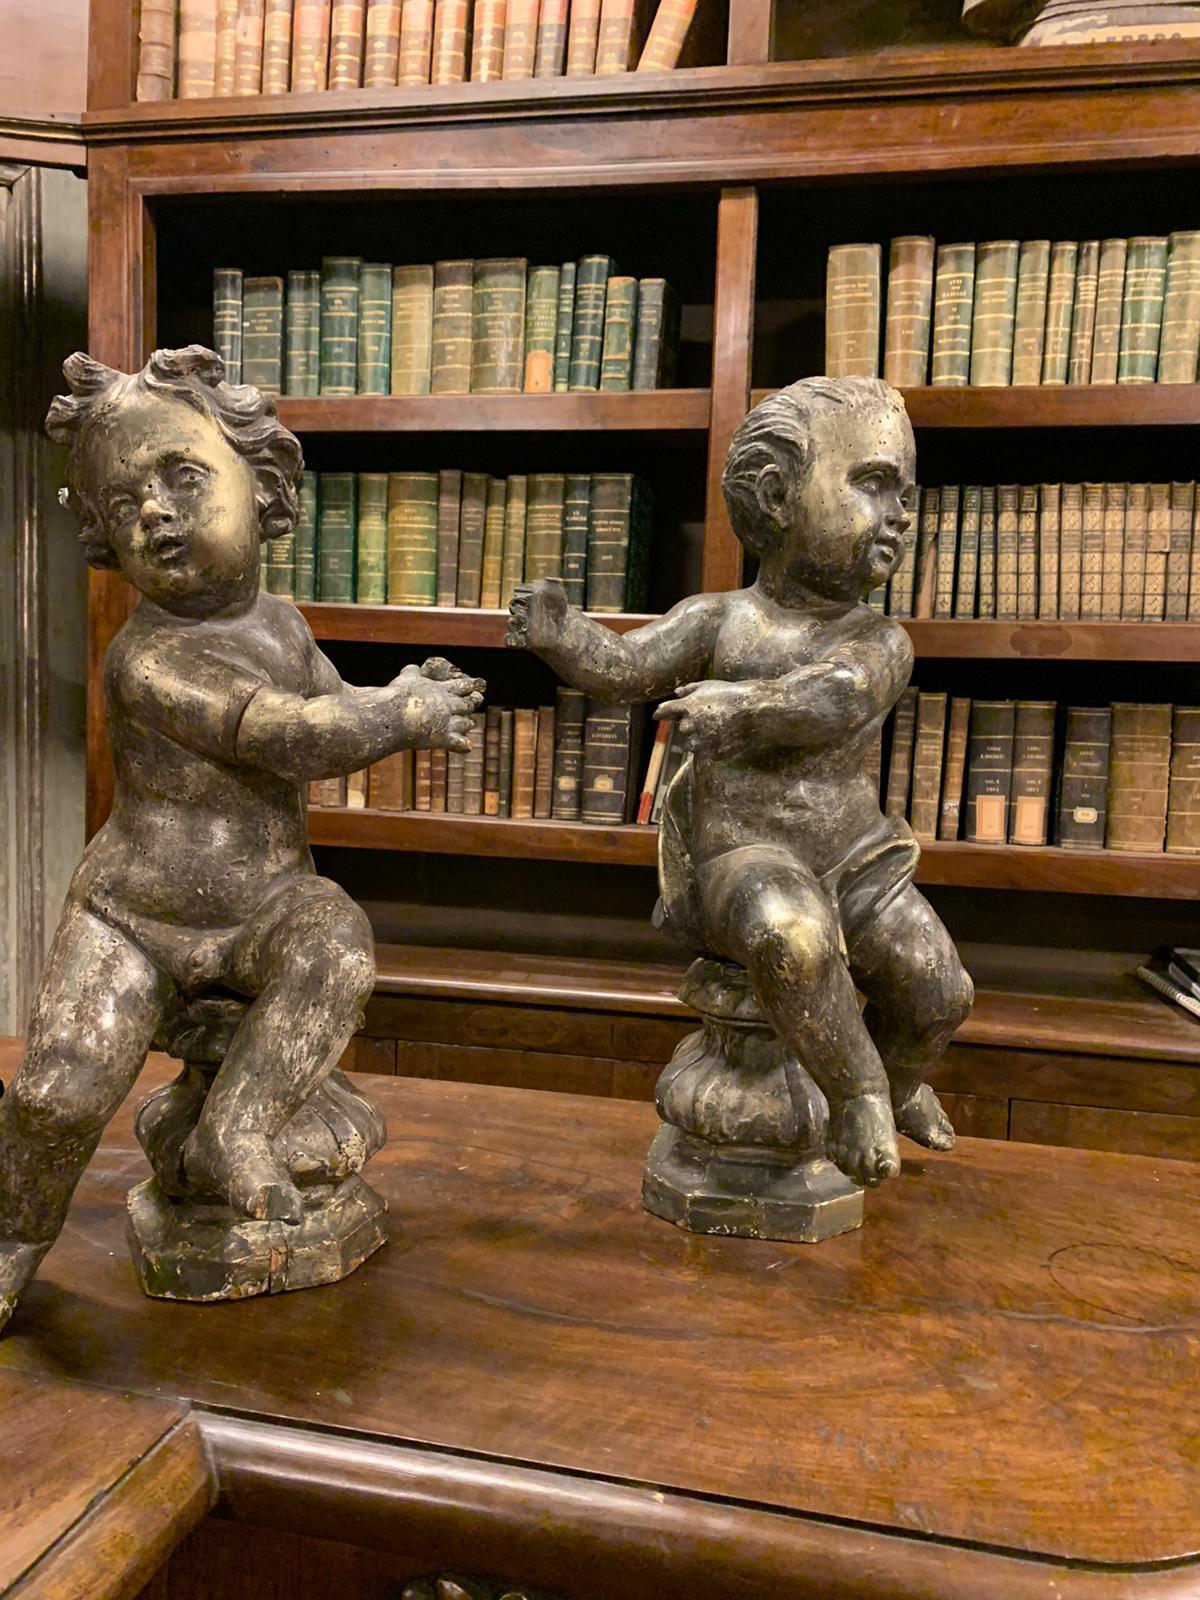 Ancient pair of sculptures, figures of wooden cherubs, carved by hand and complete with Coeval base, original silver and gilded finish, ptina of the past, hand-built in the 18th century for church in Italy.
Ideal for decorating niches, on important